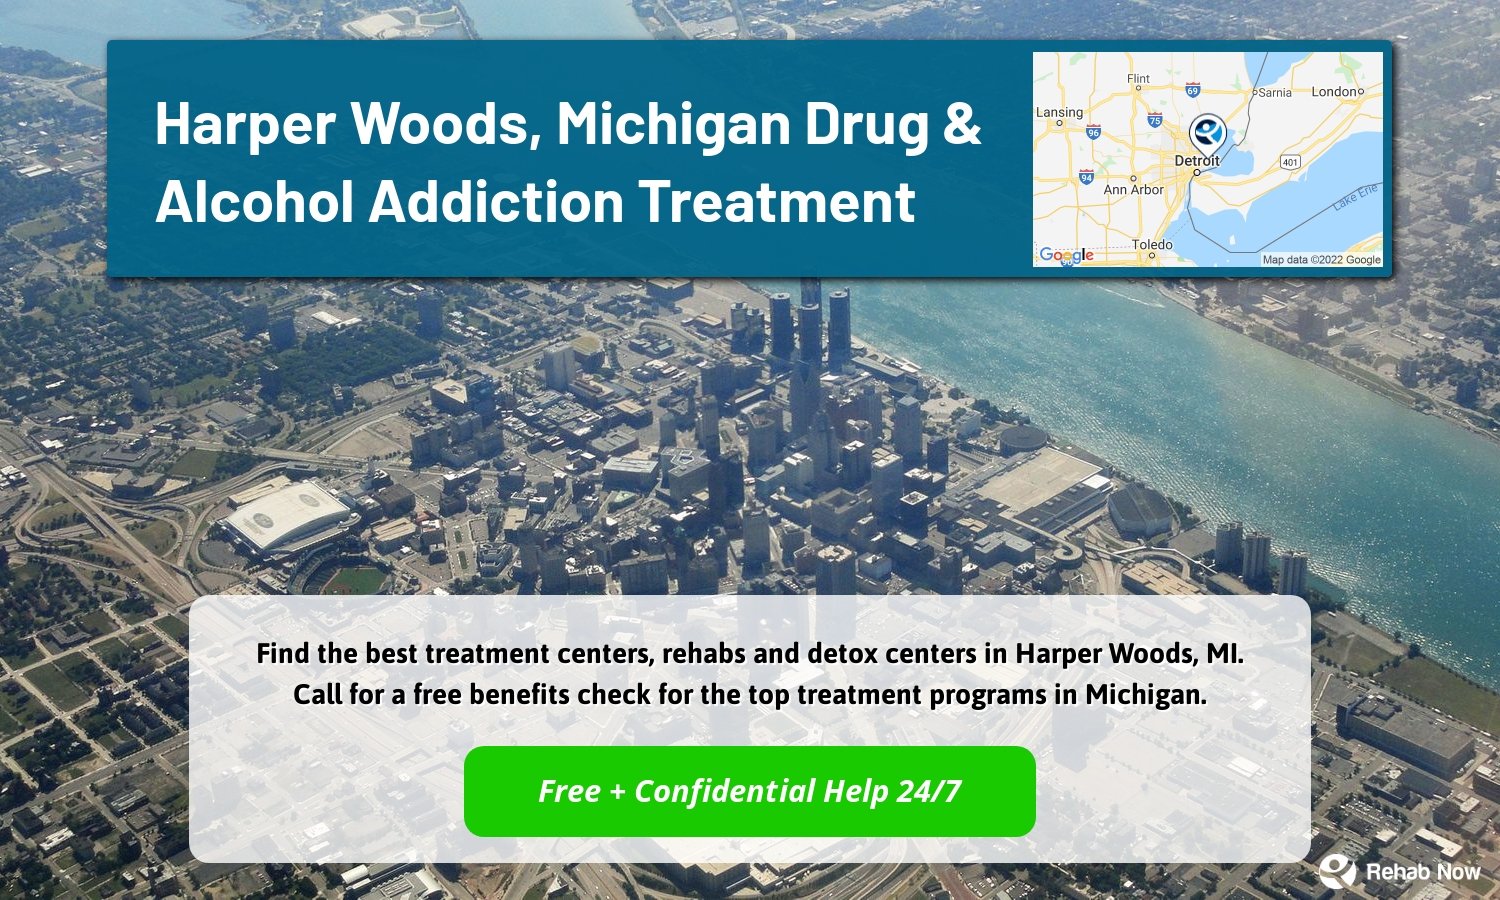 Find the best treatment centers, rehabs and detox centers in Harper Woods, MI. Call for a free benefits check for the top treatment programs in Michigan.